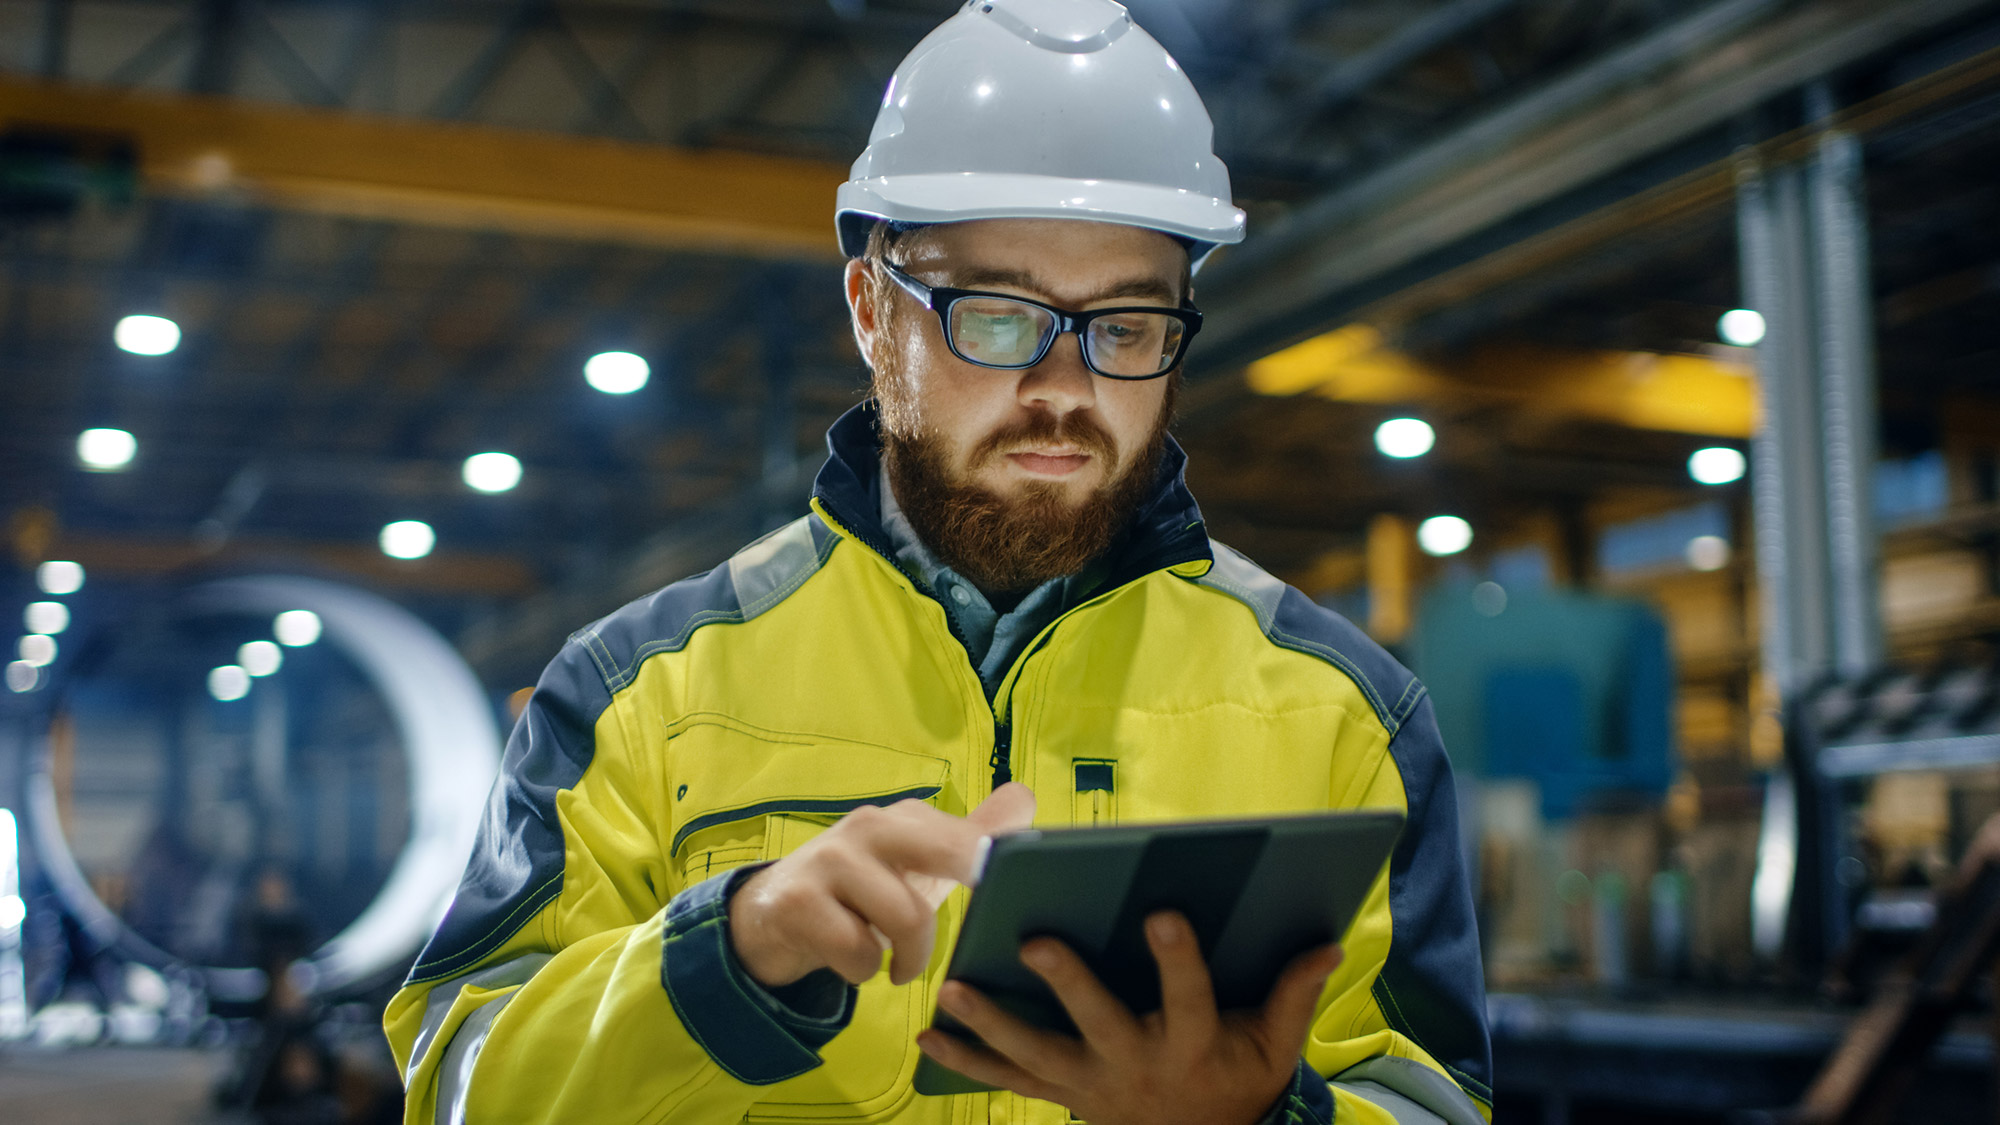 Construction worker in high-visibility jacket using a tablet on the factory floor.